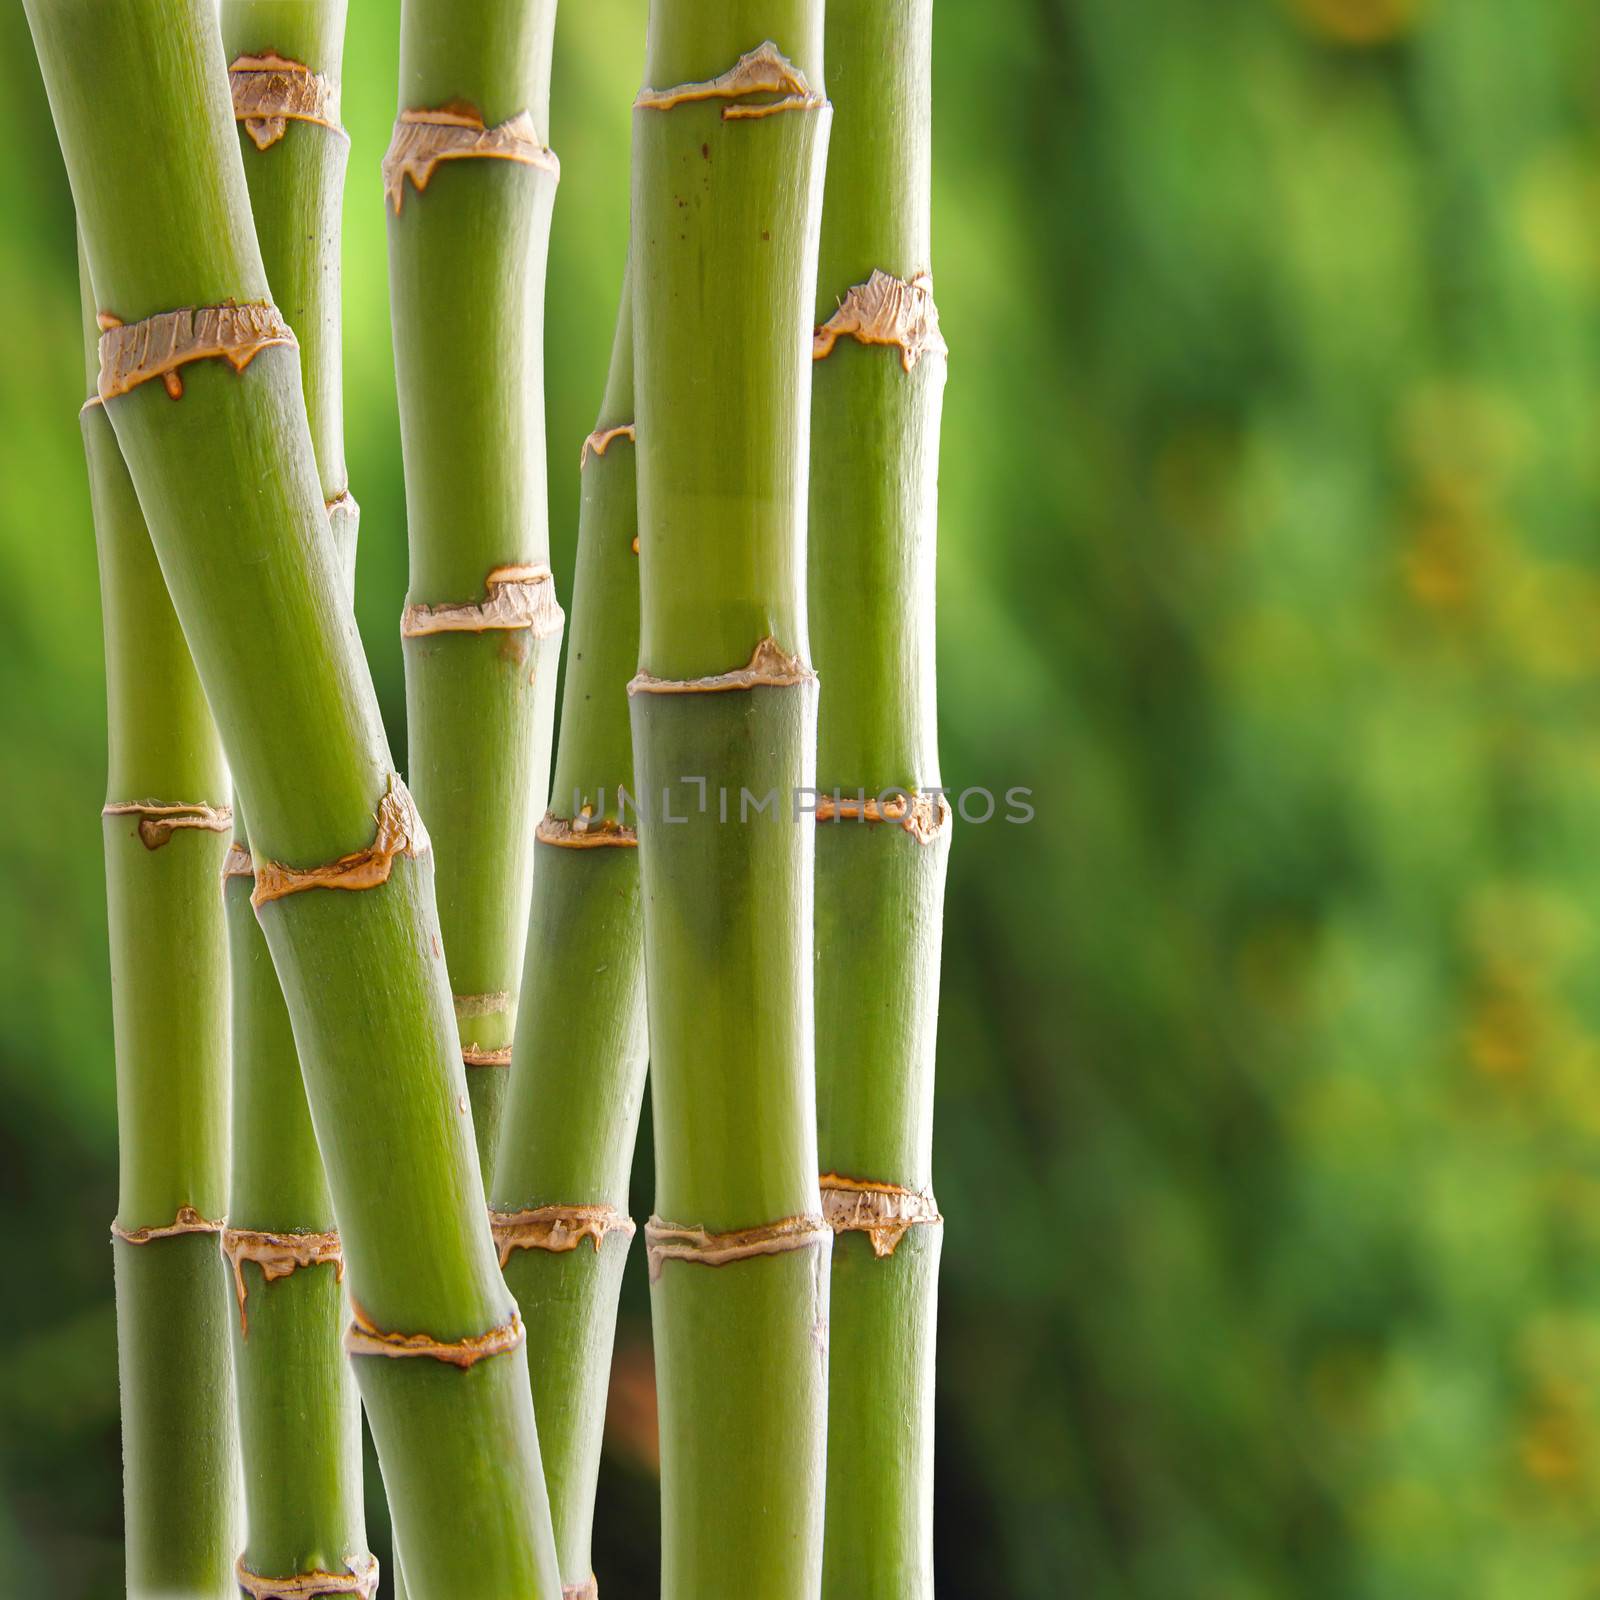 Bamboo backgroung by dynamicfoto